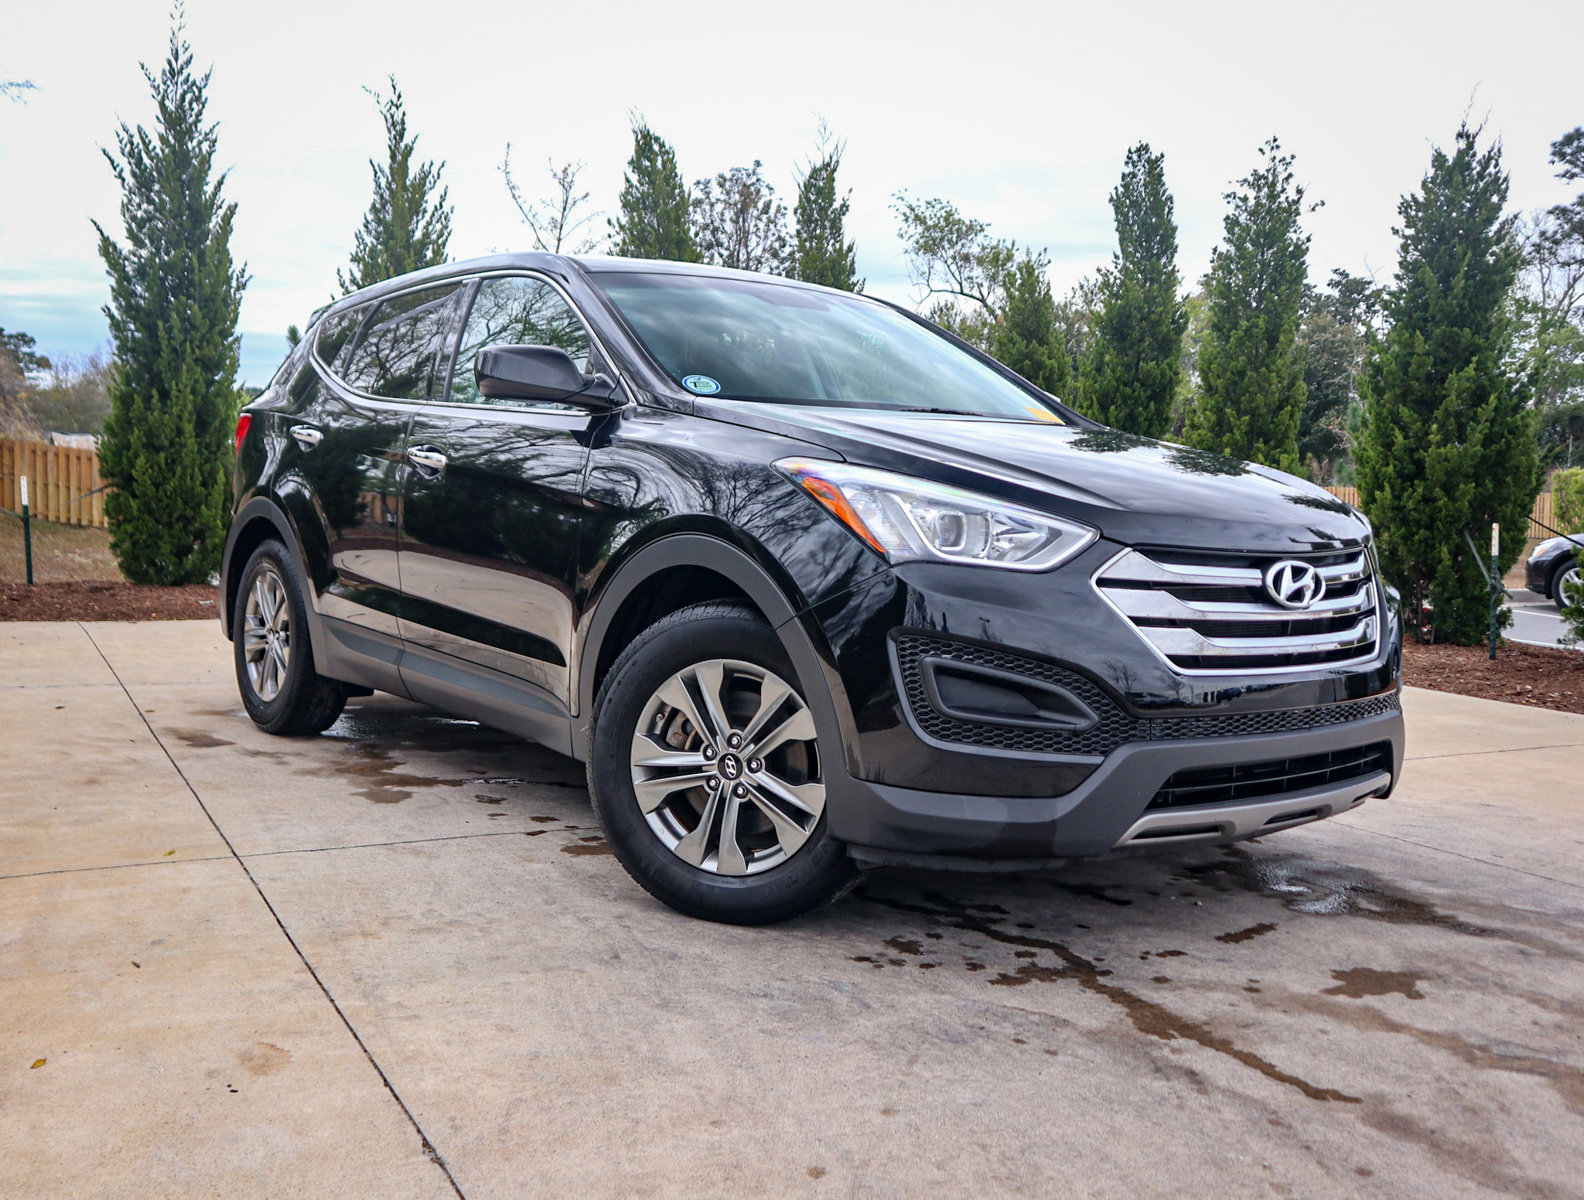 Pre-Owned 2016 Hyundai Santa Fe Sport FWD 4dr 2.4 SUV in Cary #P8129A |  Hendrick Dodge Cary